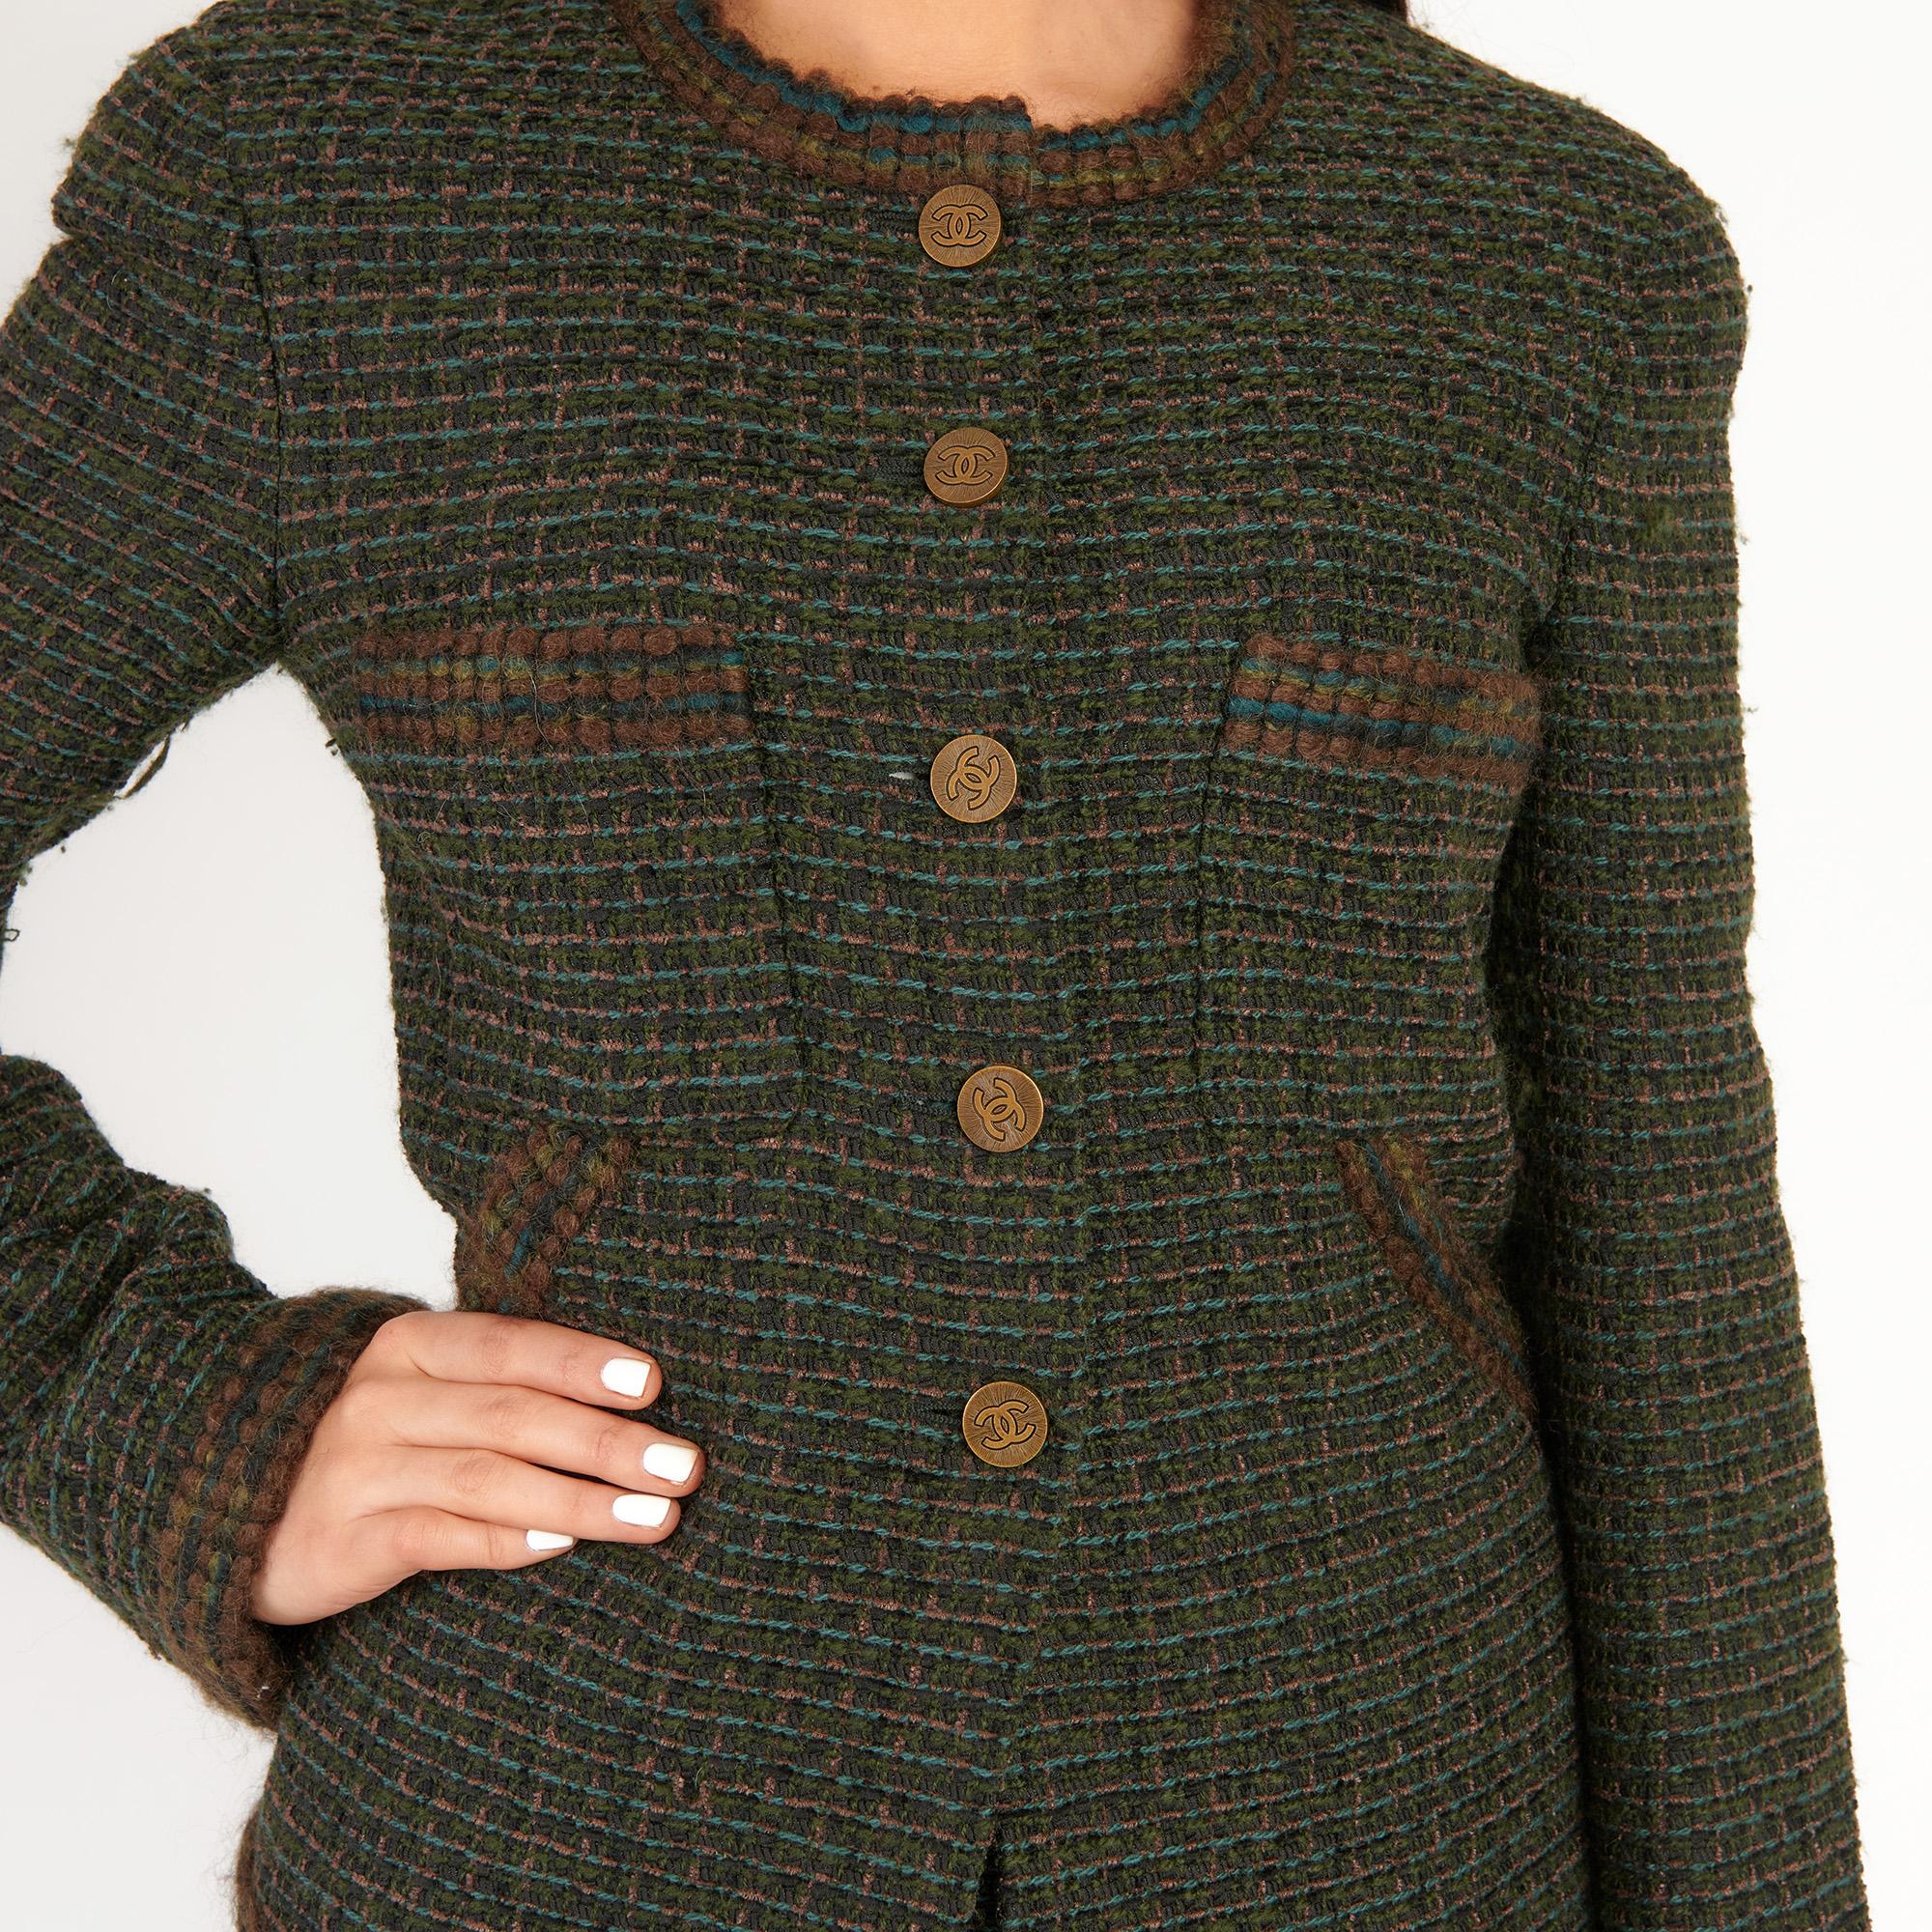 WAHF-C002
1990's Chanel Green & Brown Wool Tweed Vintage Skirt Suit

Jacket: EU 36 (UK 8) Skirt: EU 36 (UK 8) - Fits UK Size 6-8

Green & Brown 45% Wool, 30% Polyester, 20% Acrylic, 5% Nylon 

(Made in France)

This item is in excellent condition